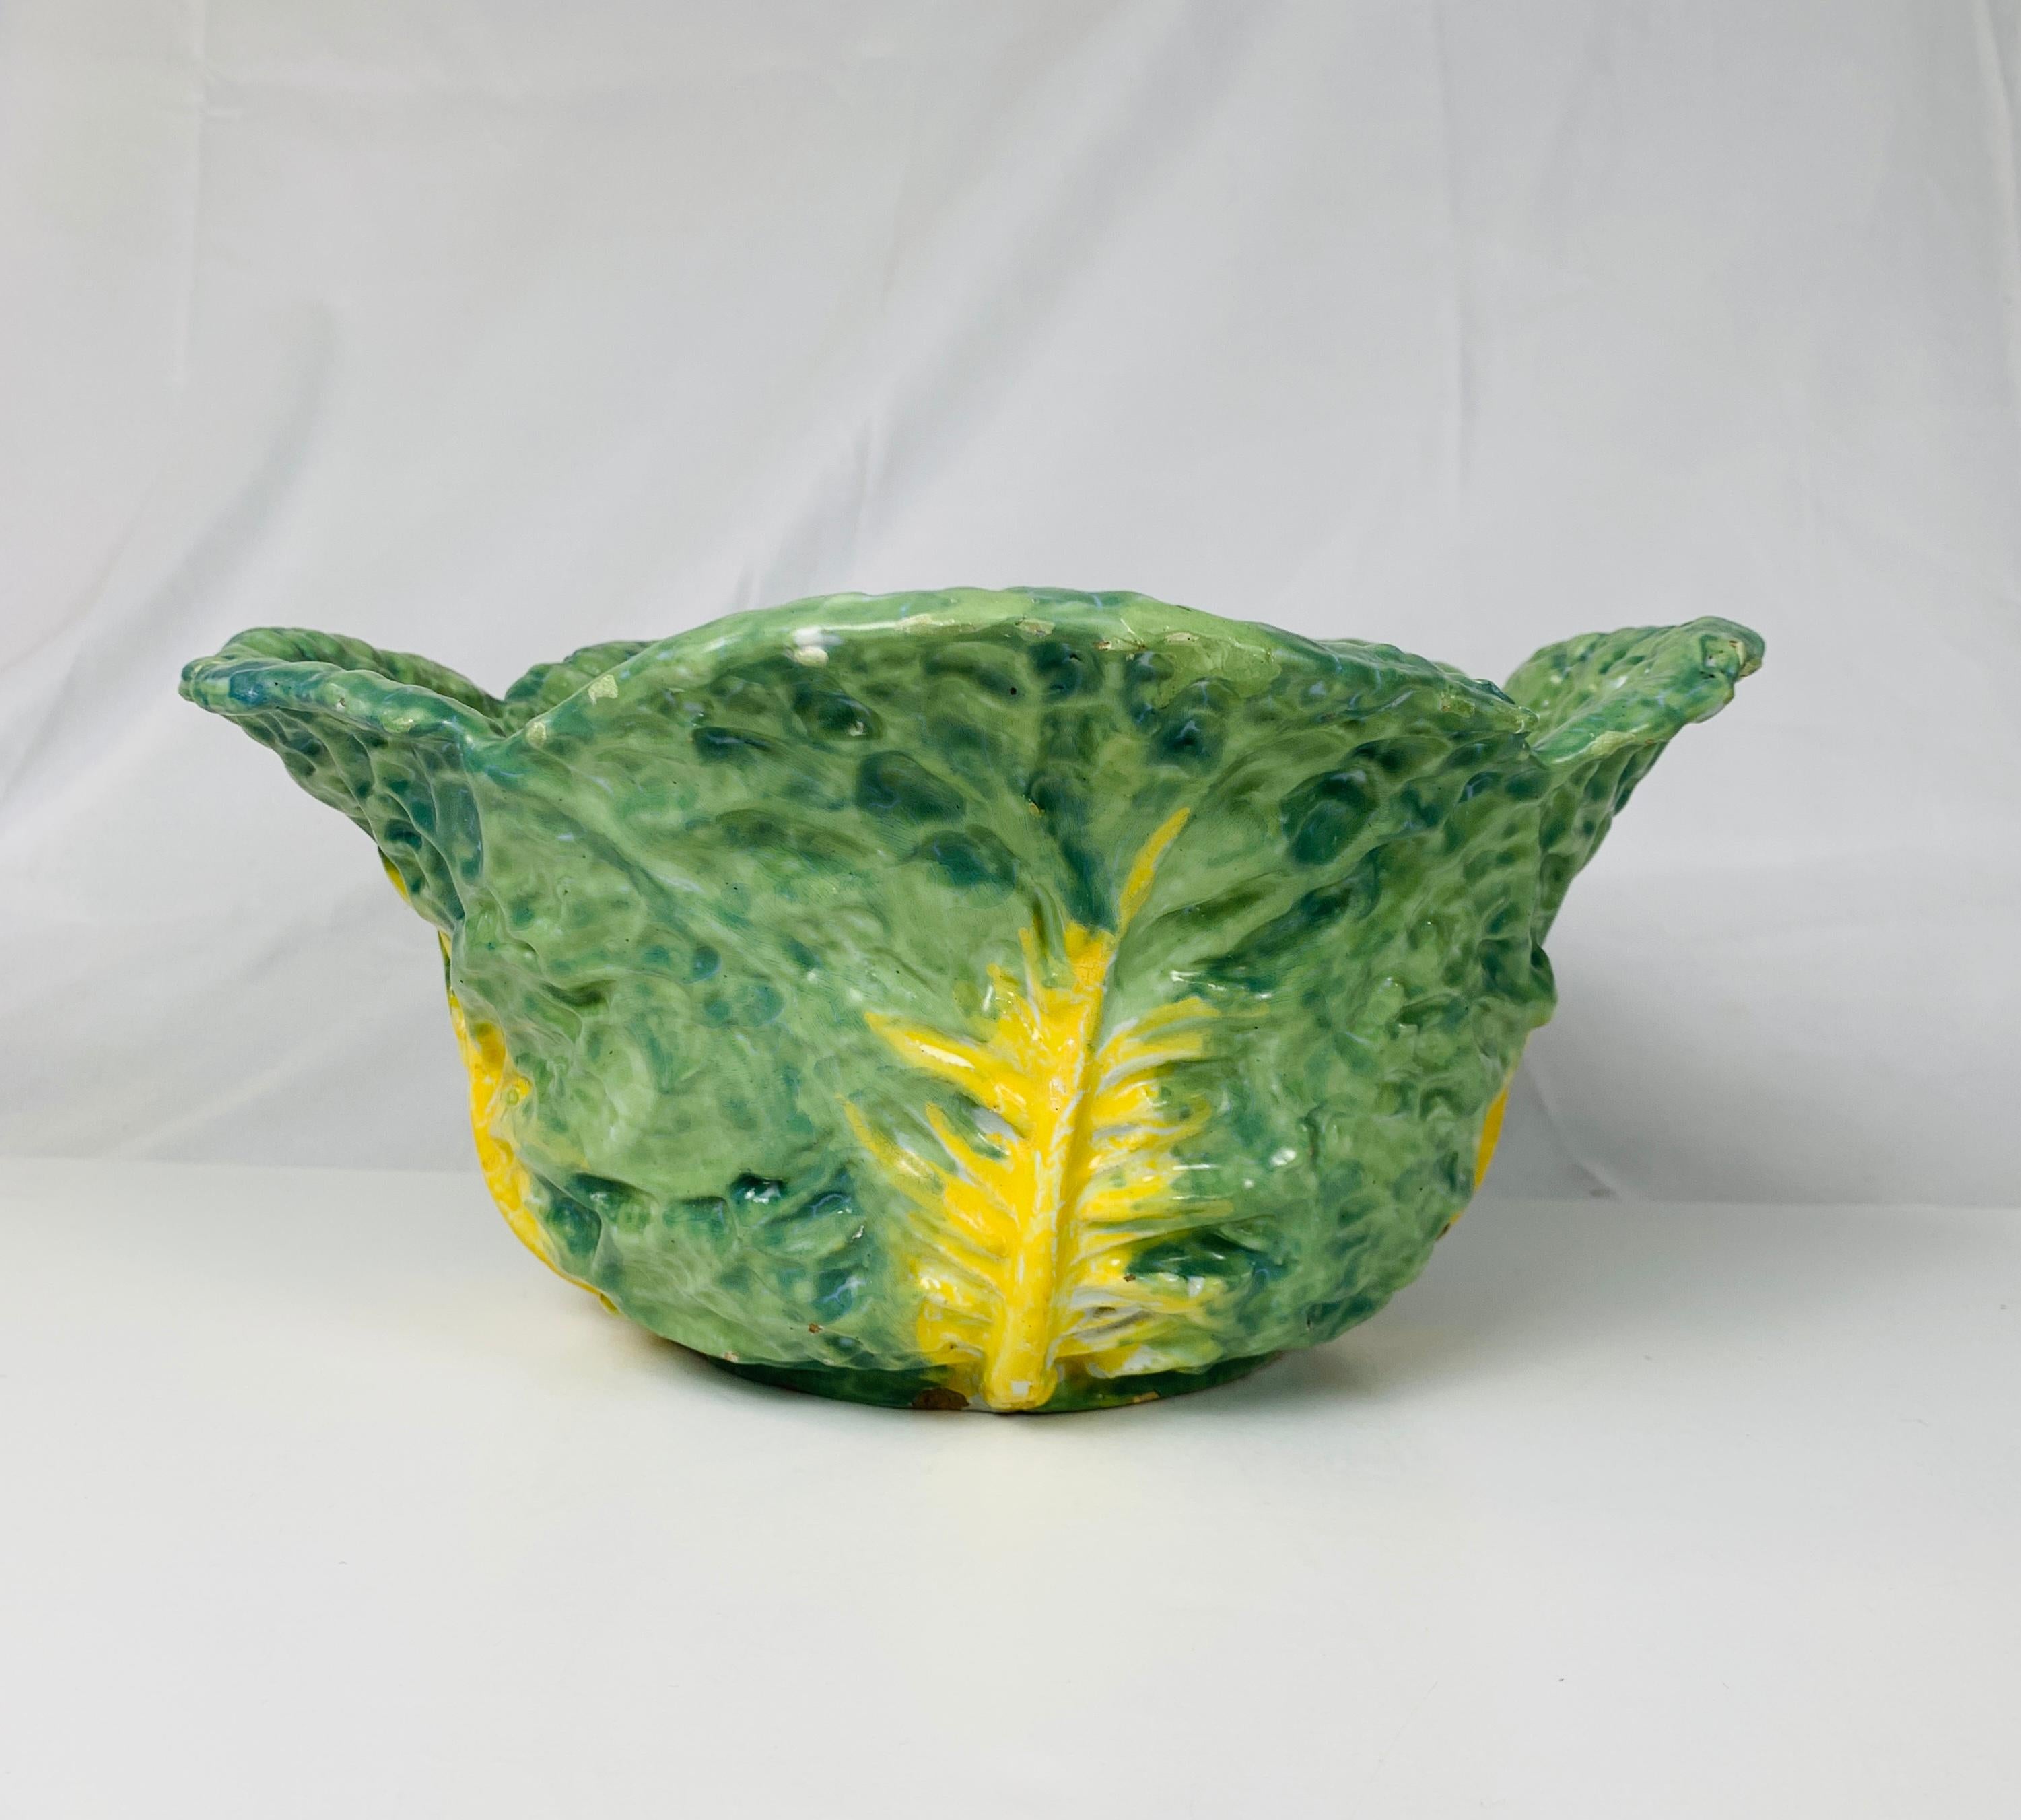 Rococo Antique Faience Cabbage Form Soup Tureen Hand-Painted in Brussels Circa 1765